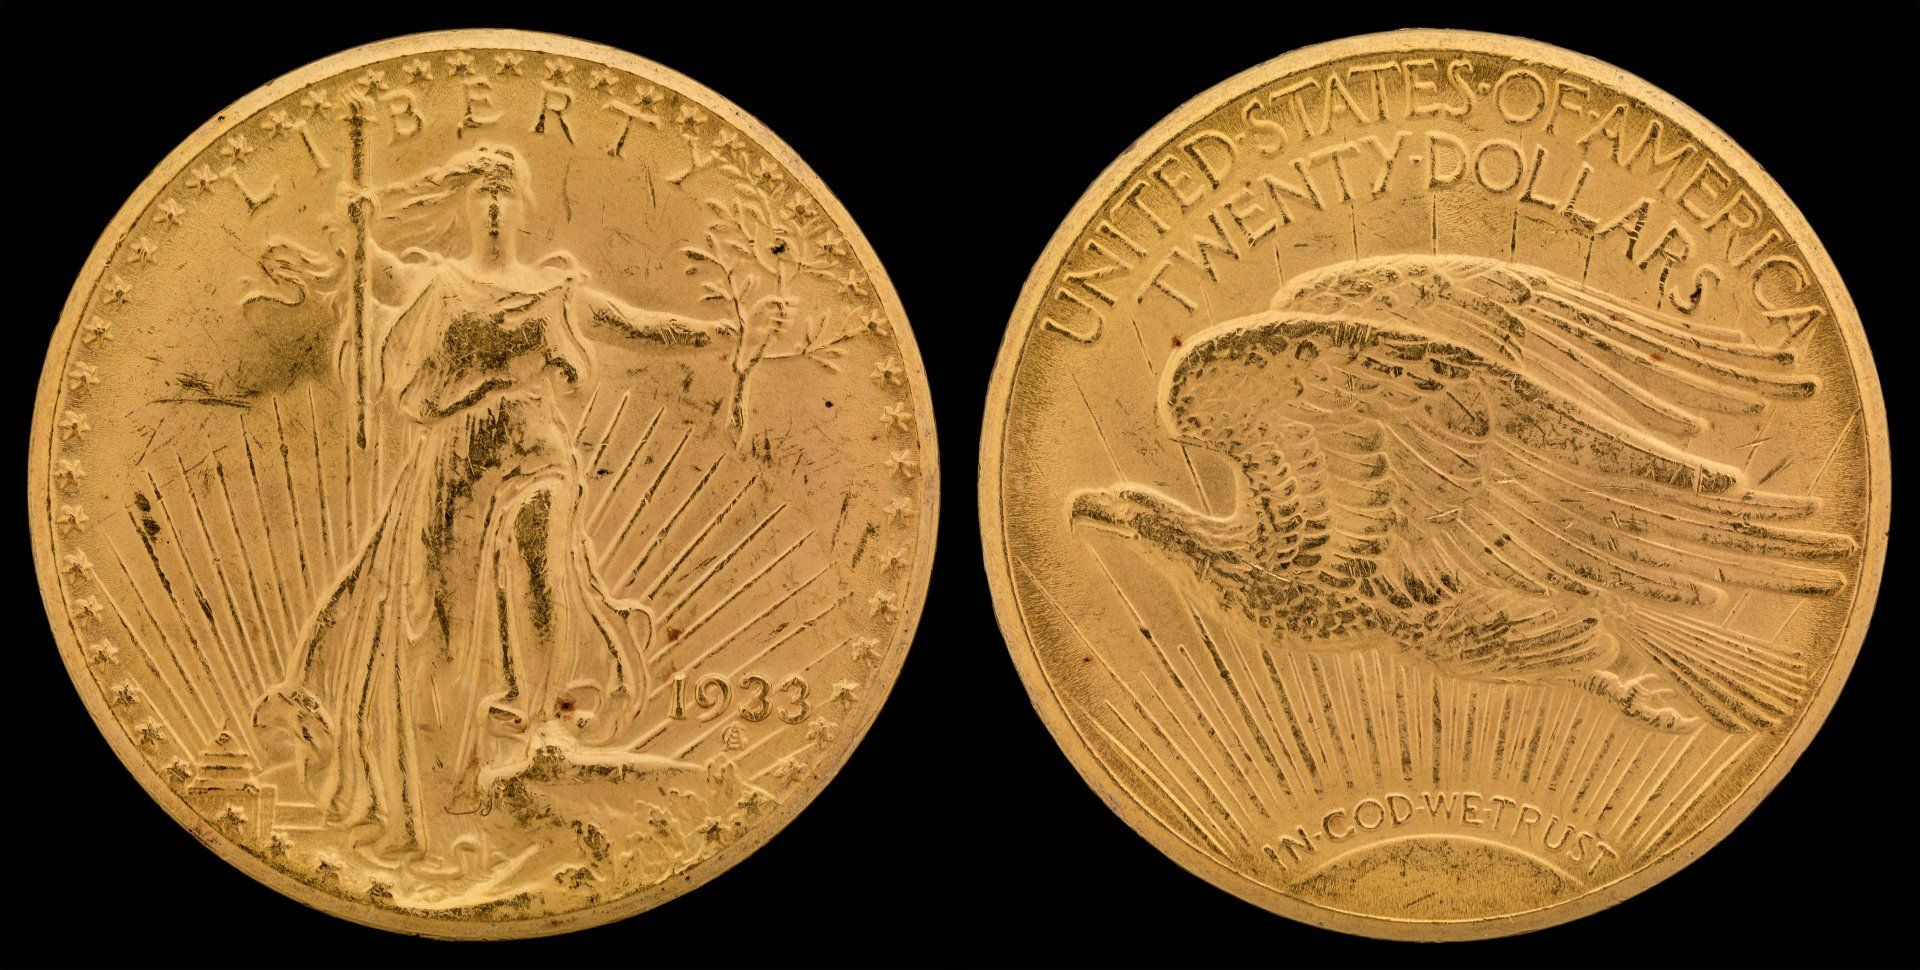 obverse and reverse of 1933 gold double eagle coin